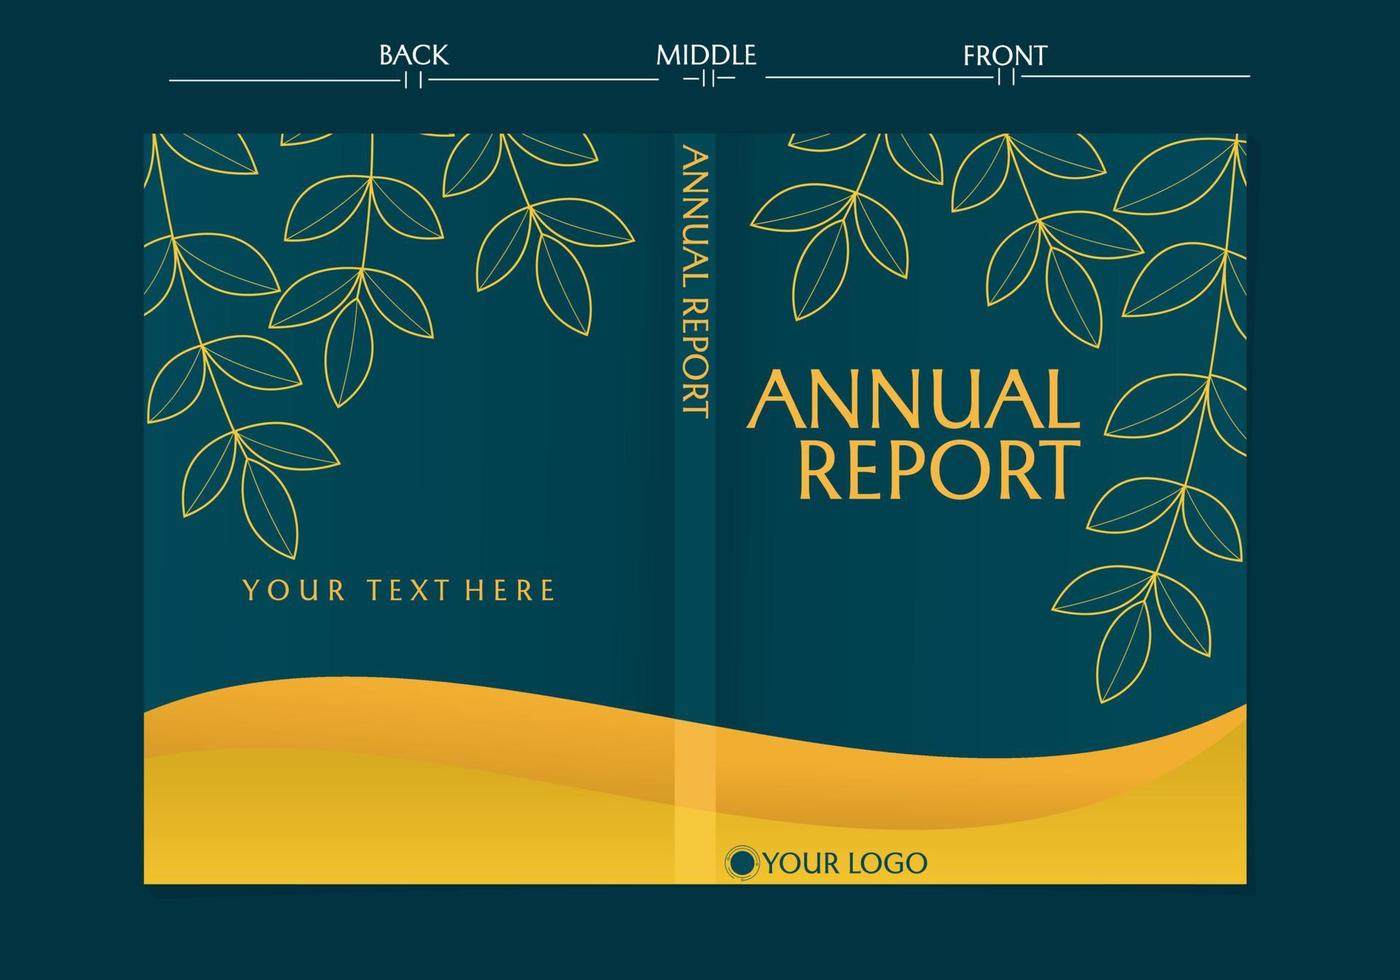 Corporate Book Cover Design Template in A4. design with botanical elements. can use to Brochure, Annual Report, Magazine, Flyer,Poster, Business Presentation, Portfolio, Banner, Website. vector